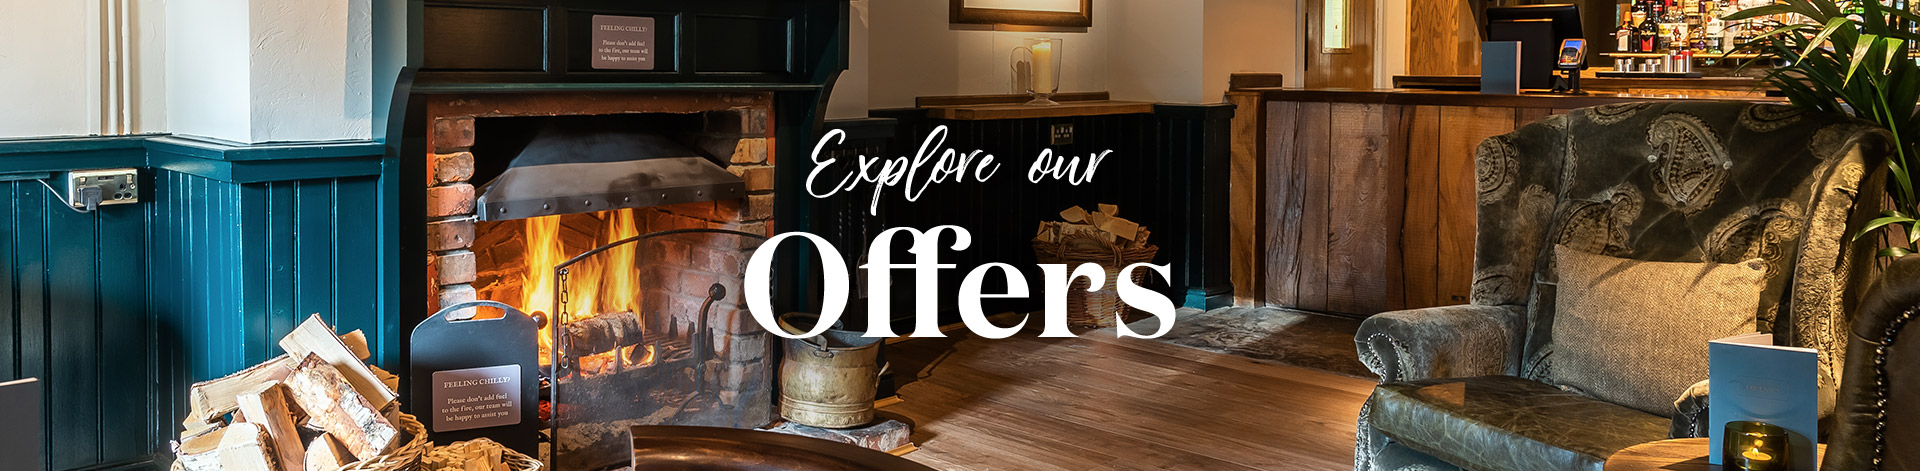 Our latest offers at The Red Lion, Dodleston